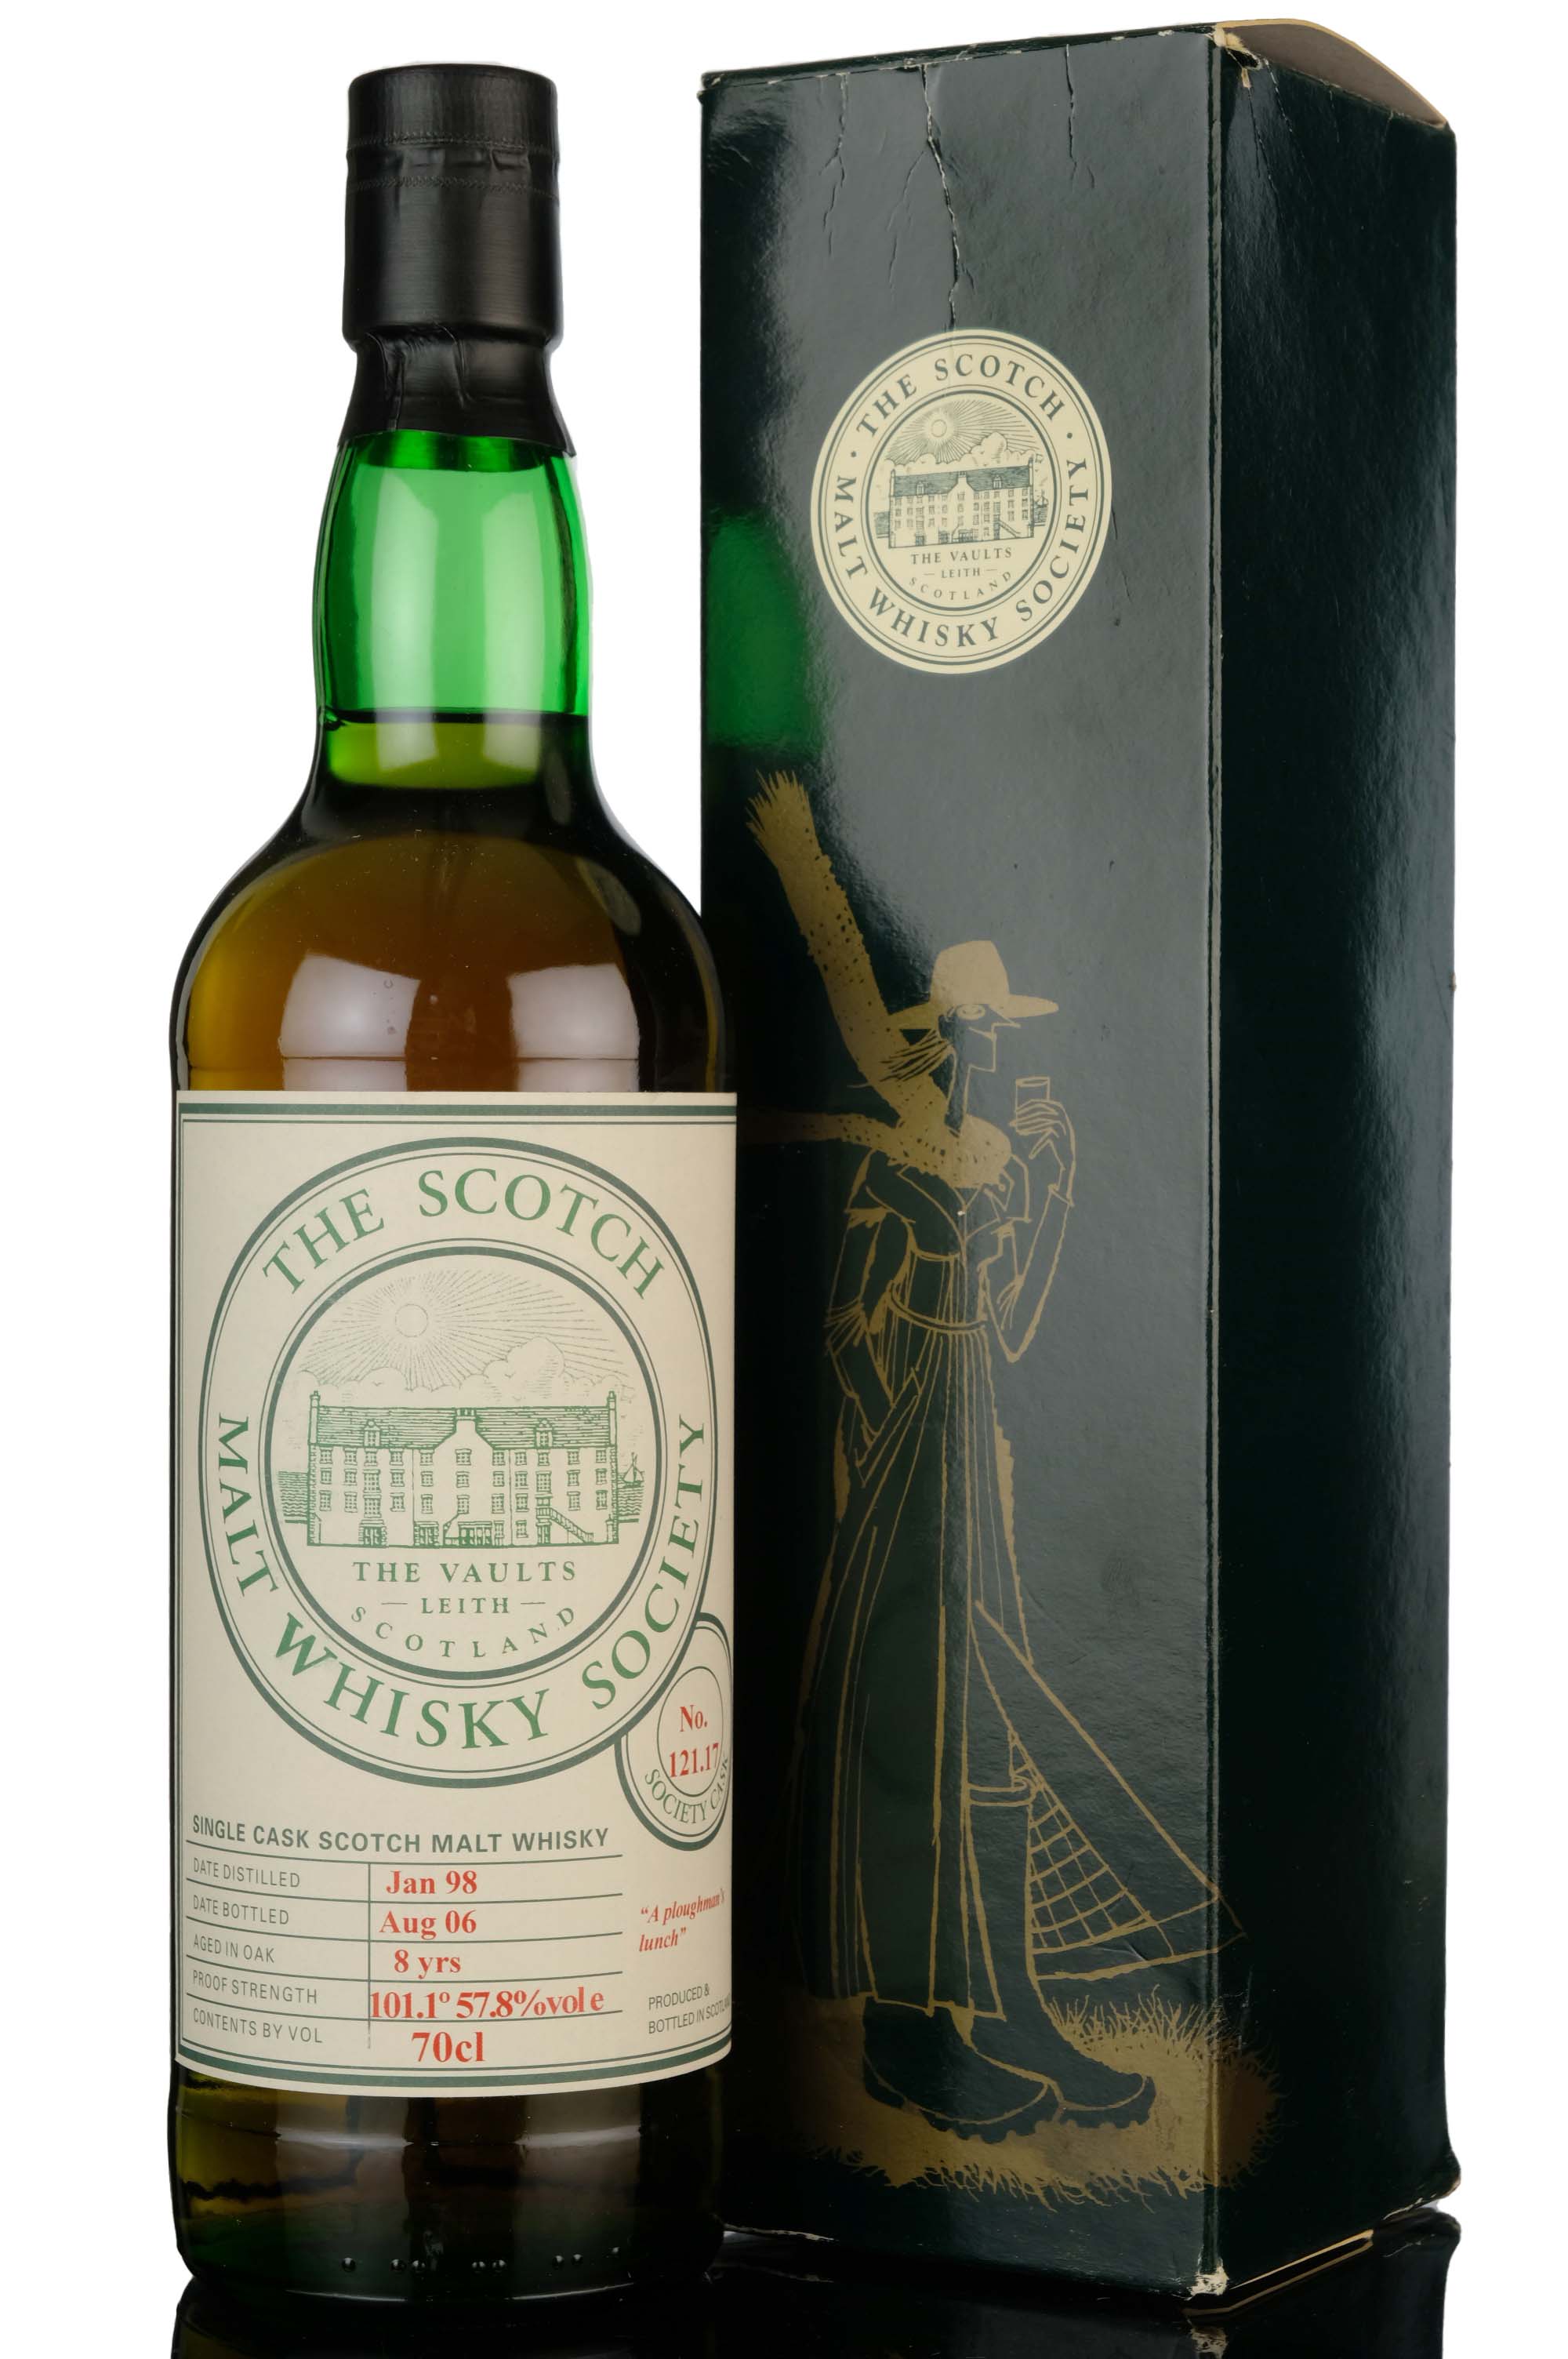 Arran 1998-2006 - 8 Year Old - SMWS 121.17 - A Ploughmans Lunch